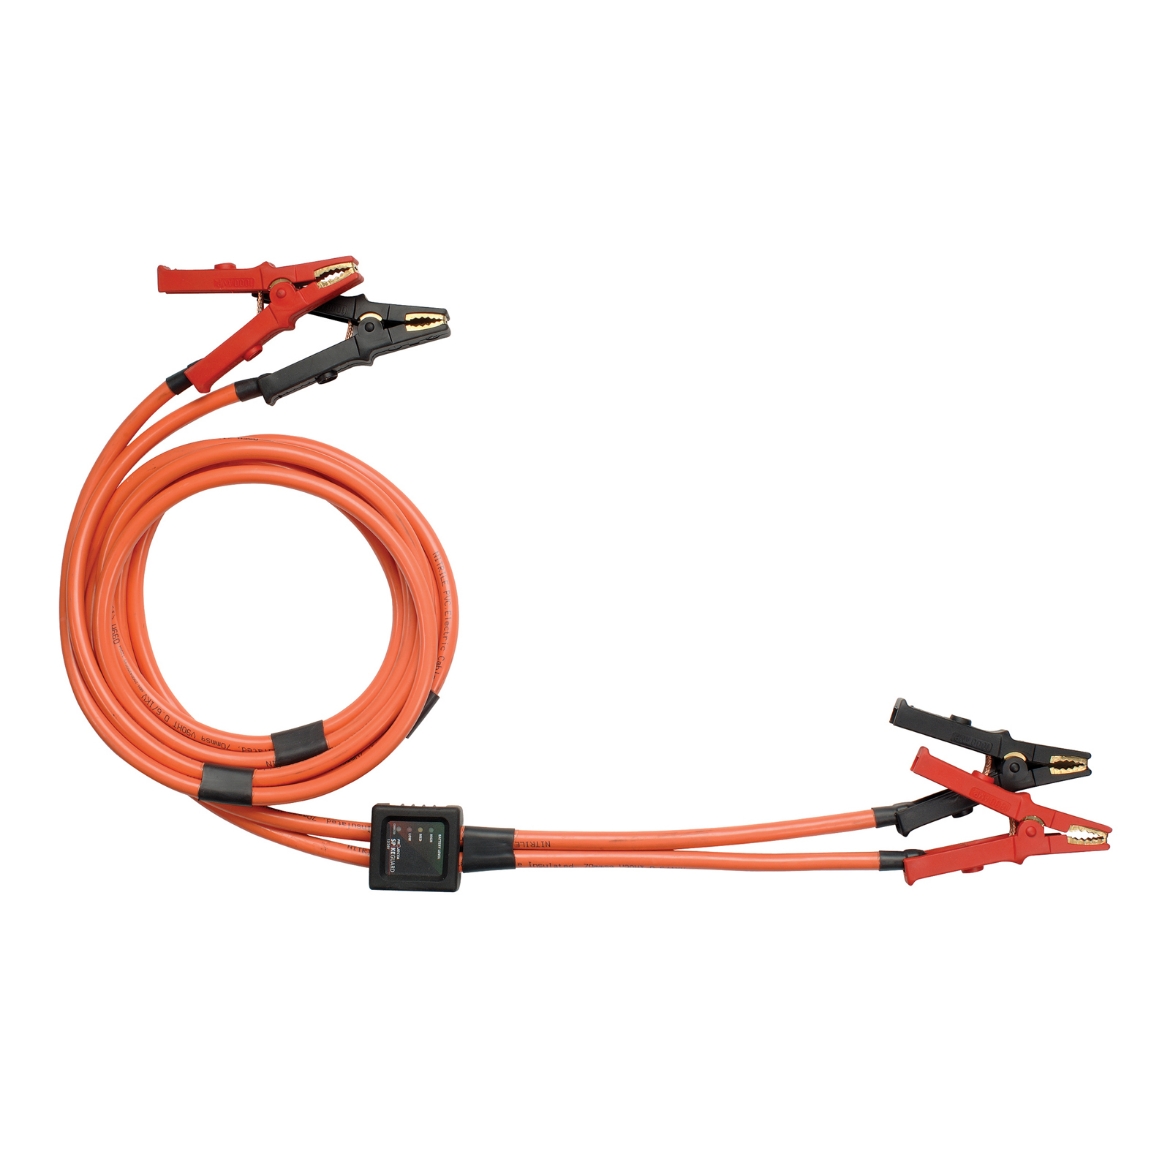 Picture of PROJECTA 1000A 70MM2 PREMIUM HEAVY-DUTY NITRILE BOOSTER CABLE 6M